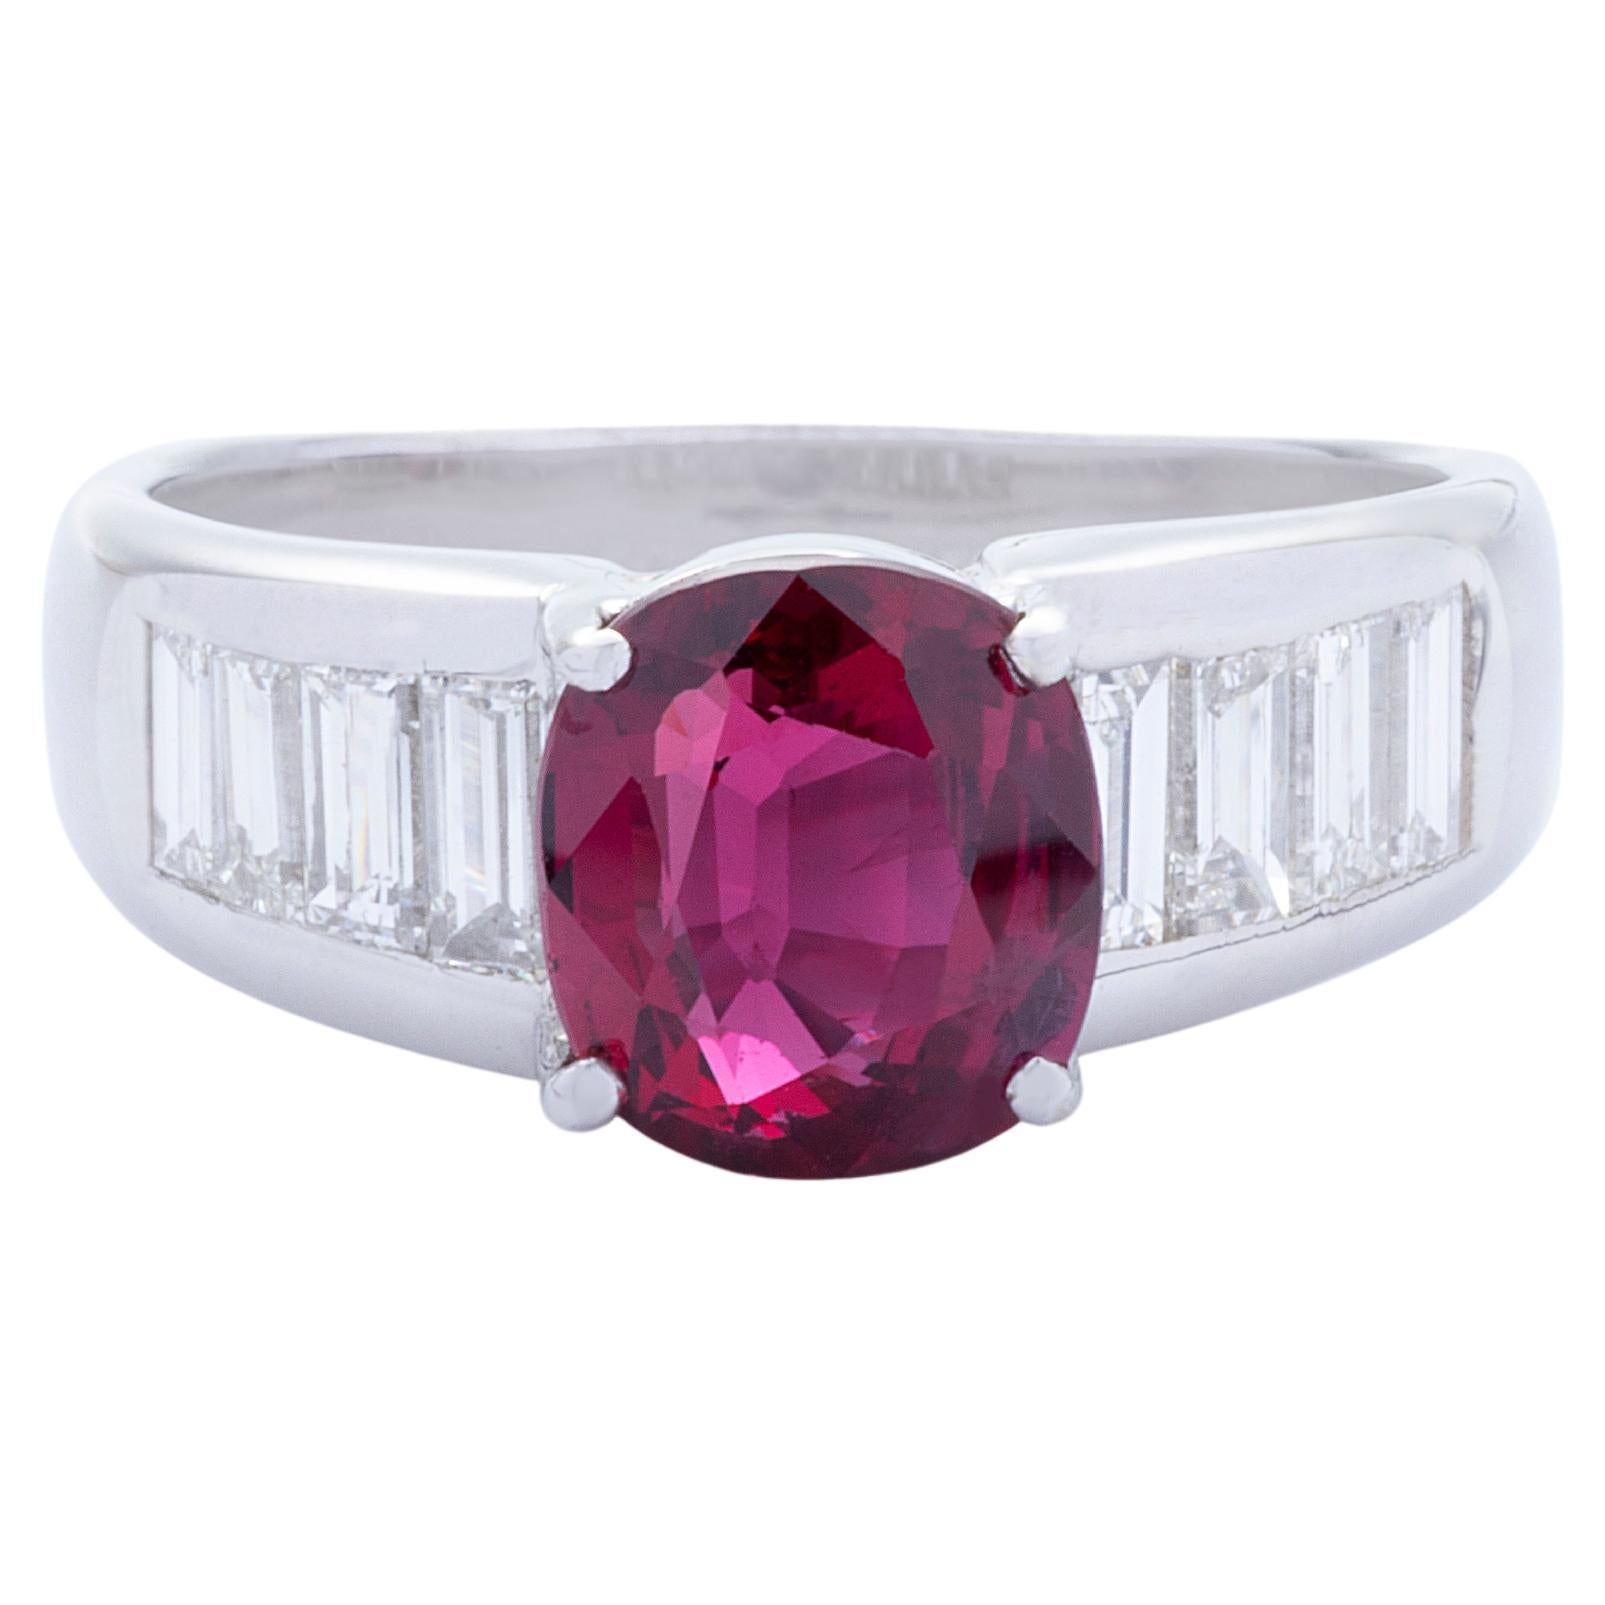 GRS 3.21 Carat Siam Ruby & 0.55ct Baguette Diamond 18k White Gold Cocktail Ring For Sale